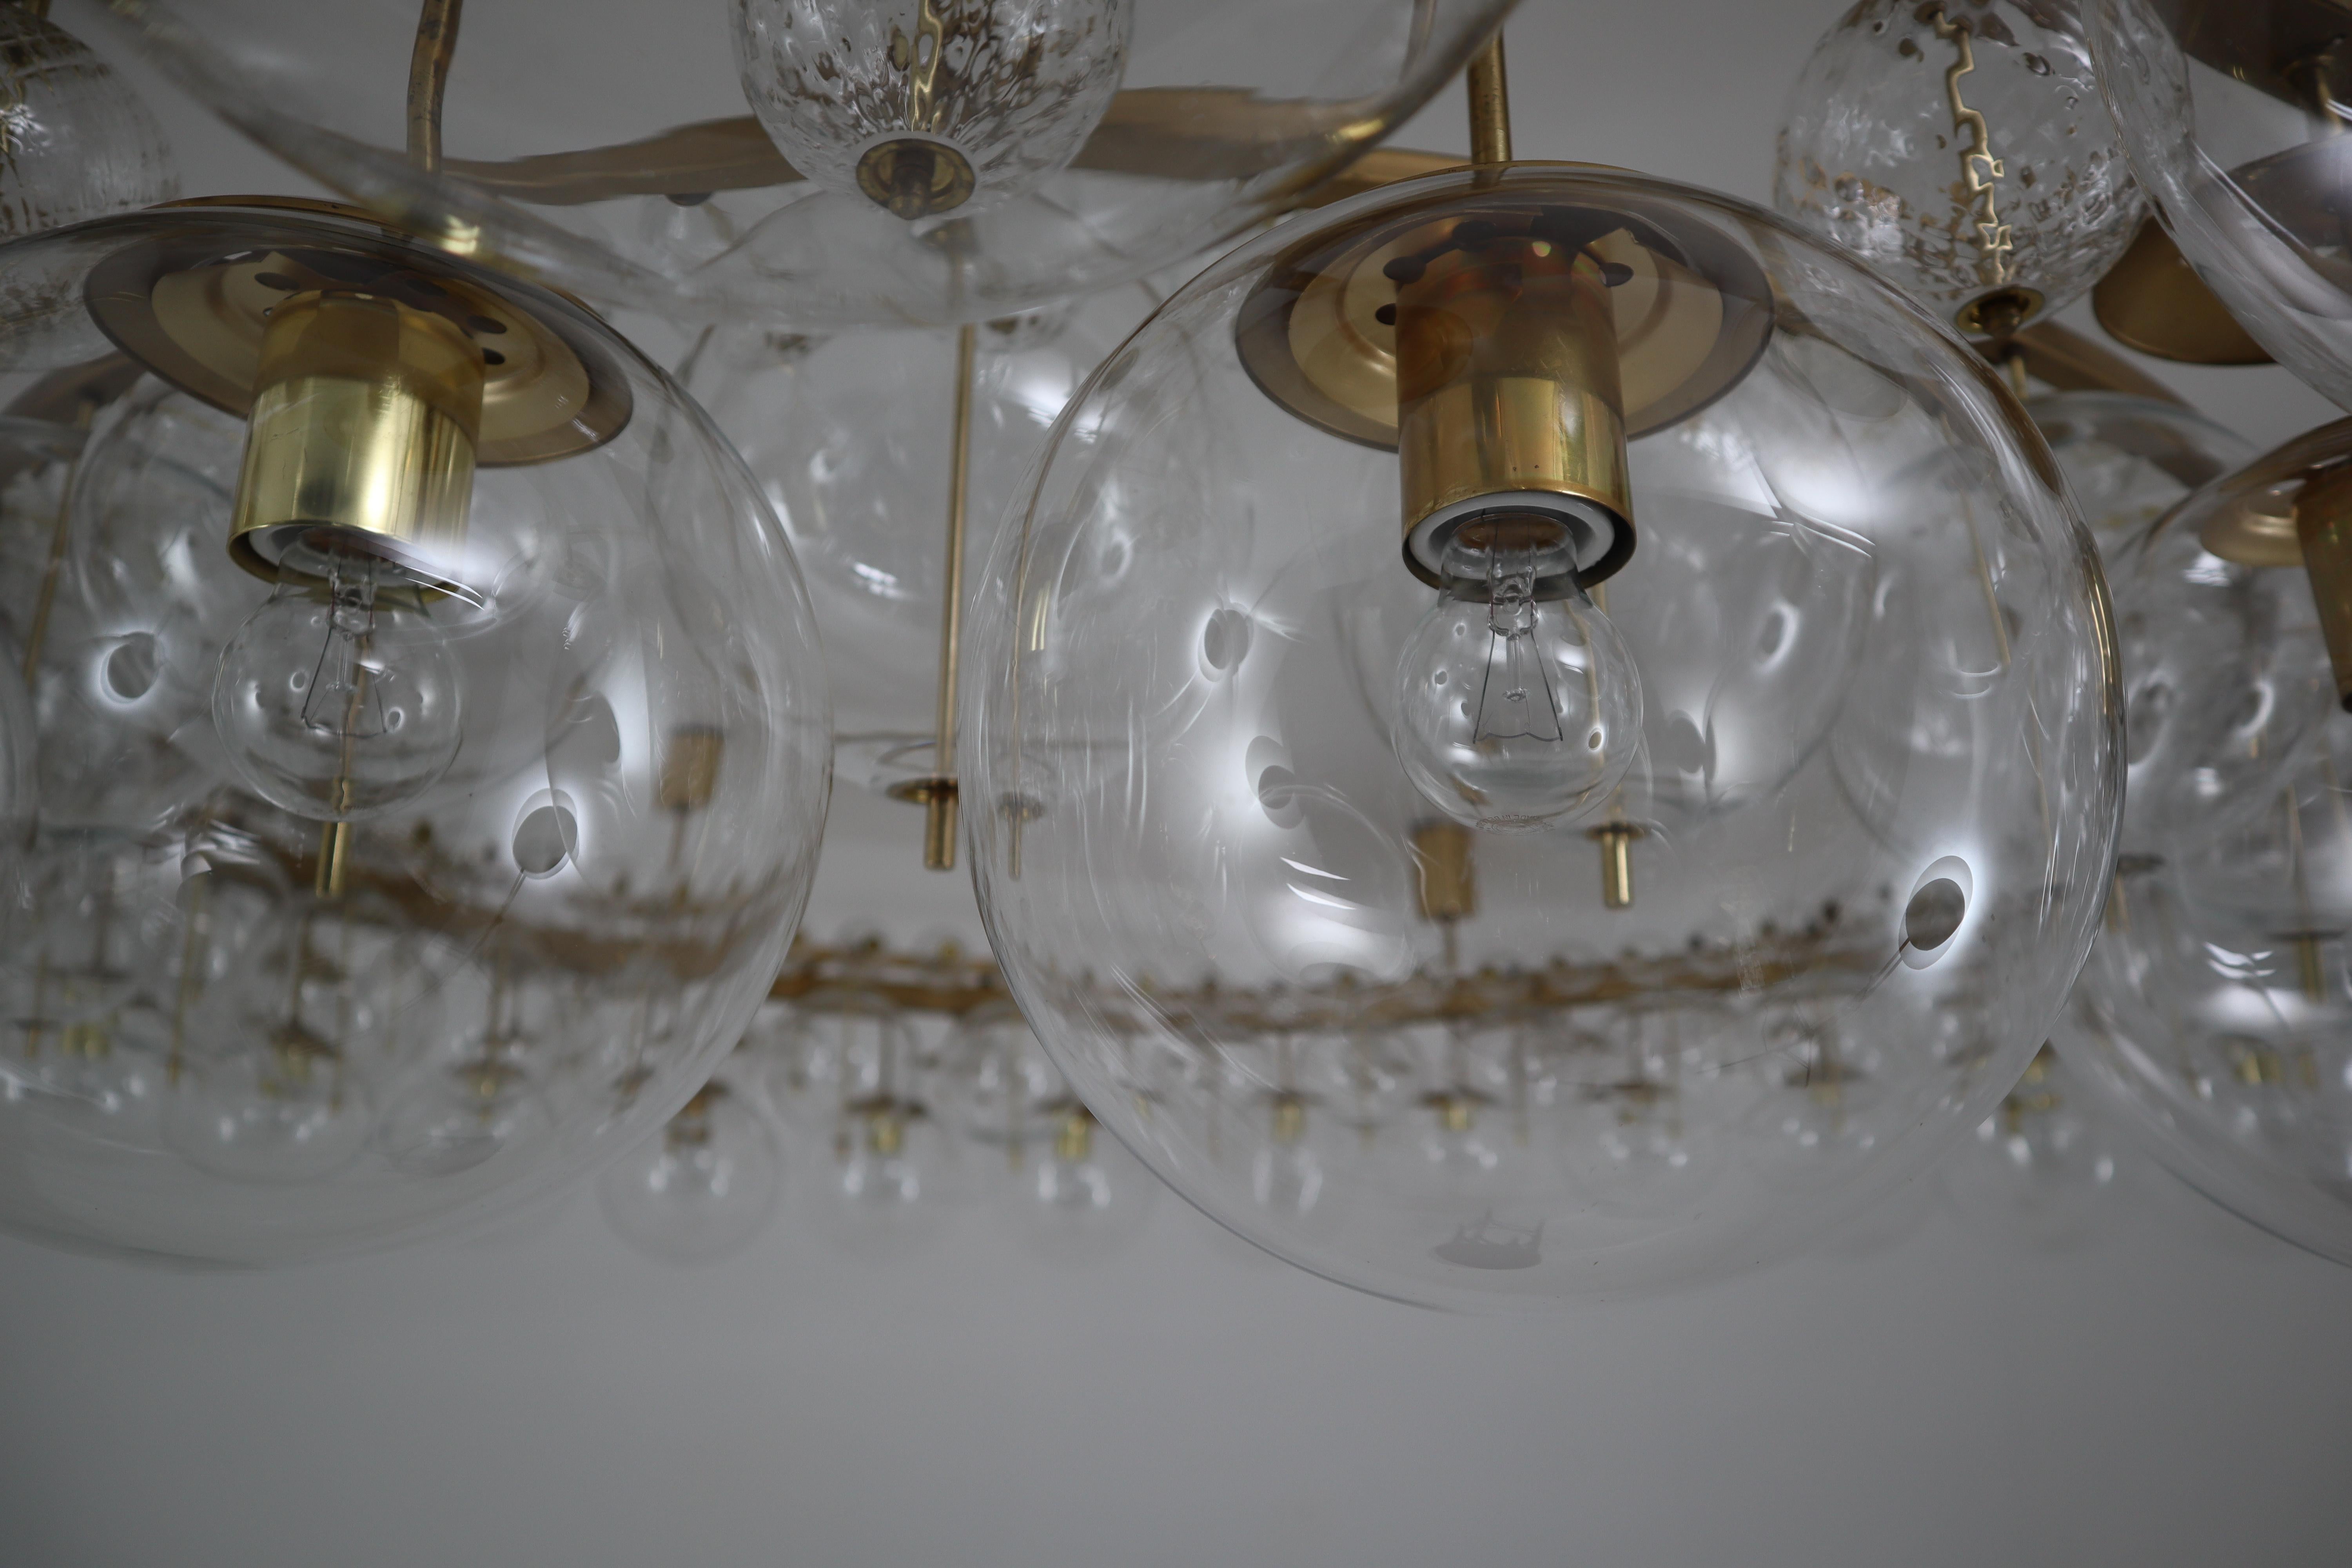 Two Extremely Large Hotel Chandeliers with Brass Fixture and Hand-Blowed Glass 8